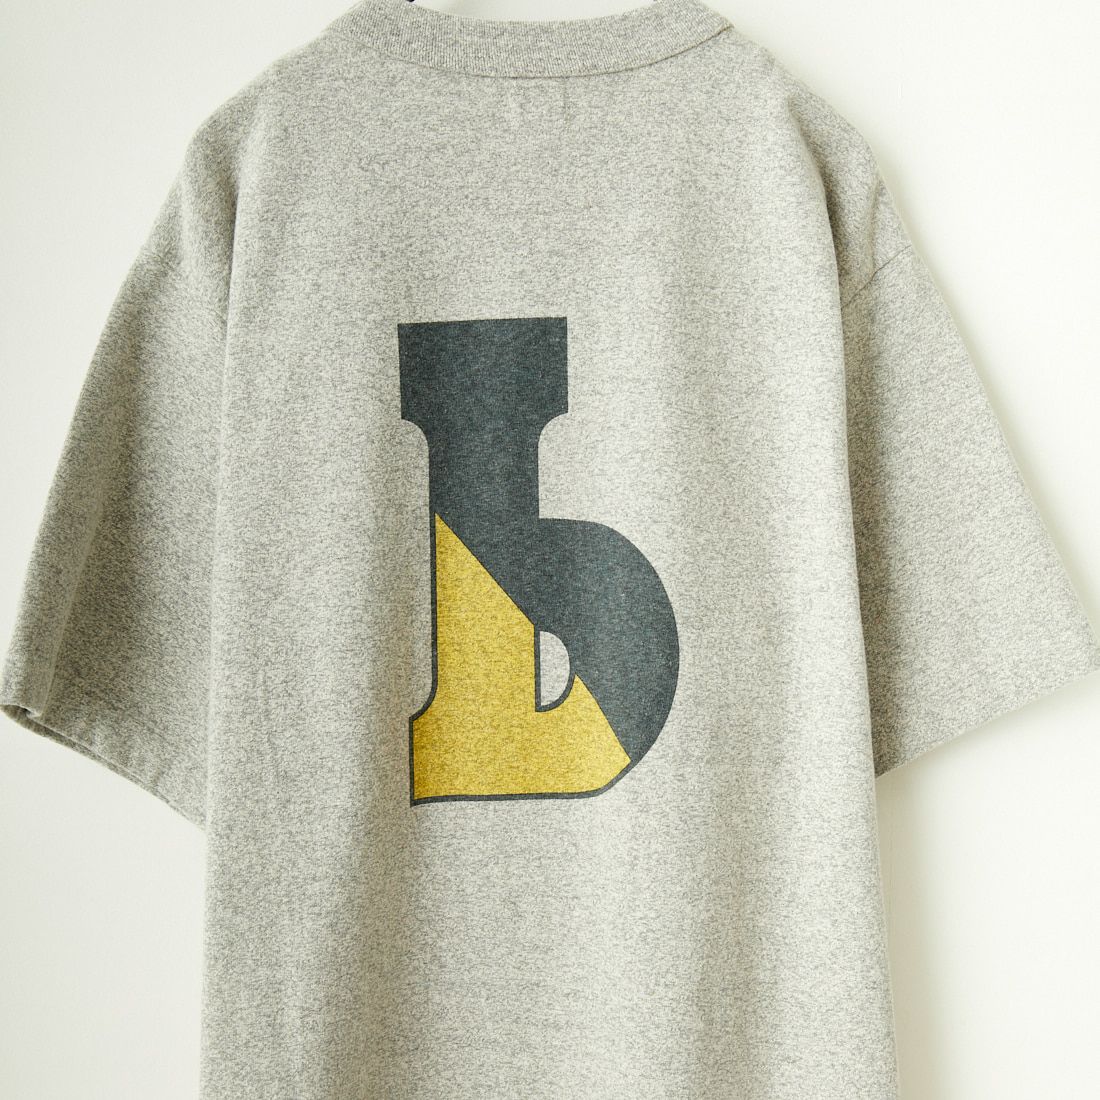 blurhms ROOTSTOCK [ブラームス ルーツストック] スタンダード プリントTシャツ [BROOTS24S26D] 02 H.GREY